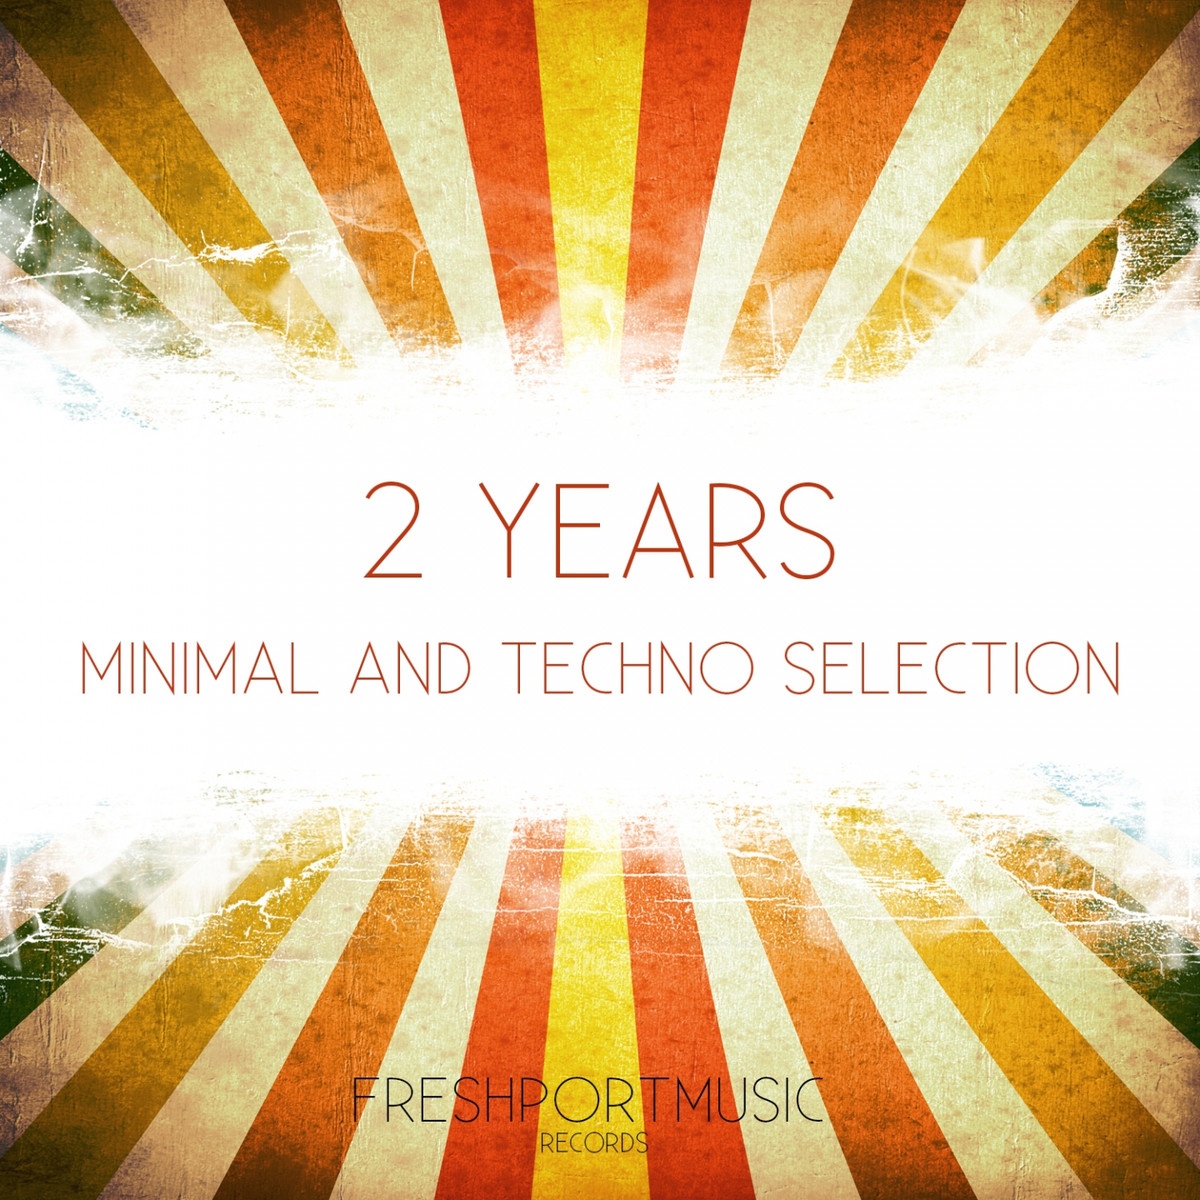 2 Years Minimal And Techno Selection